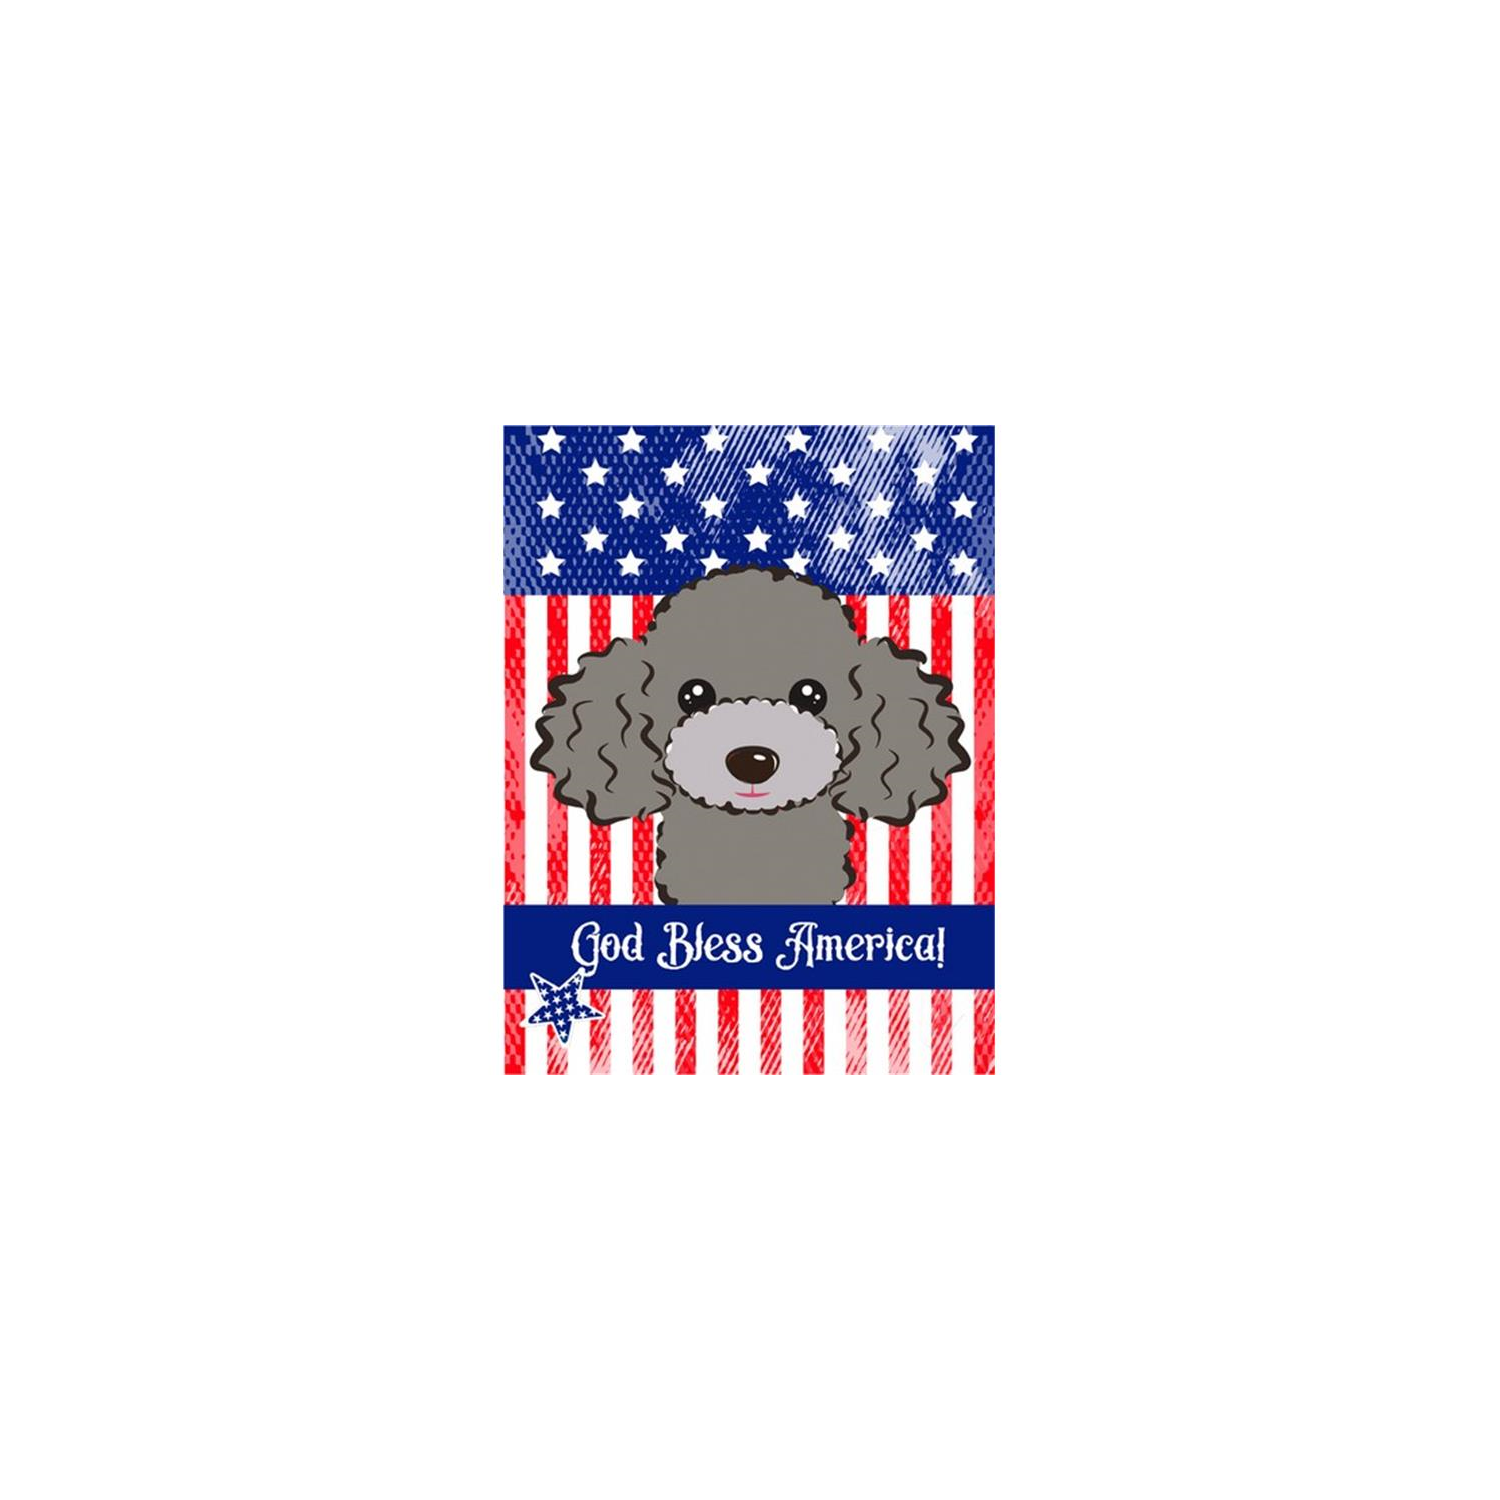 Carolines Treasures BB2189GF God Bless American Flag with Silver Gray Poodle Flag Garden